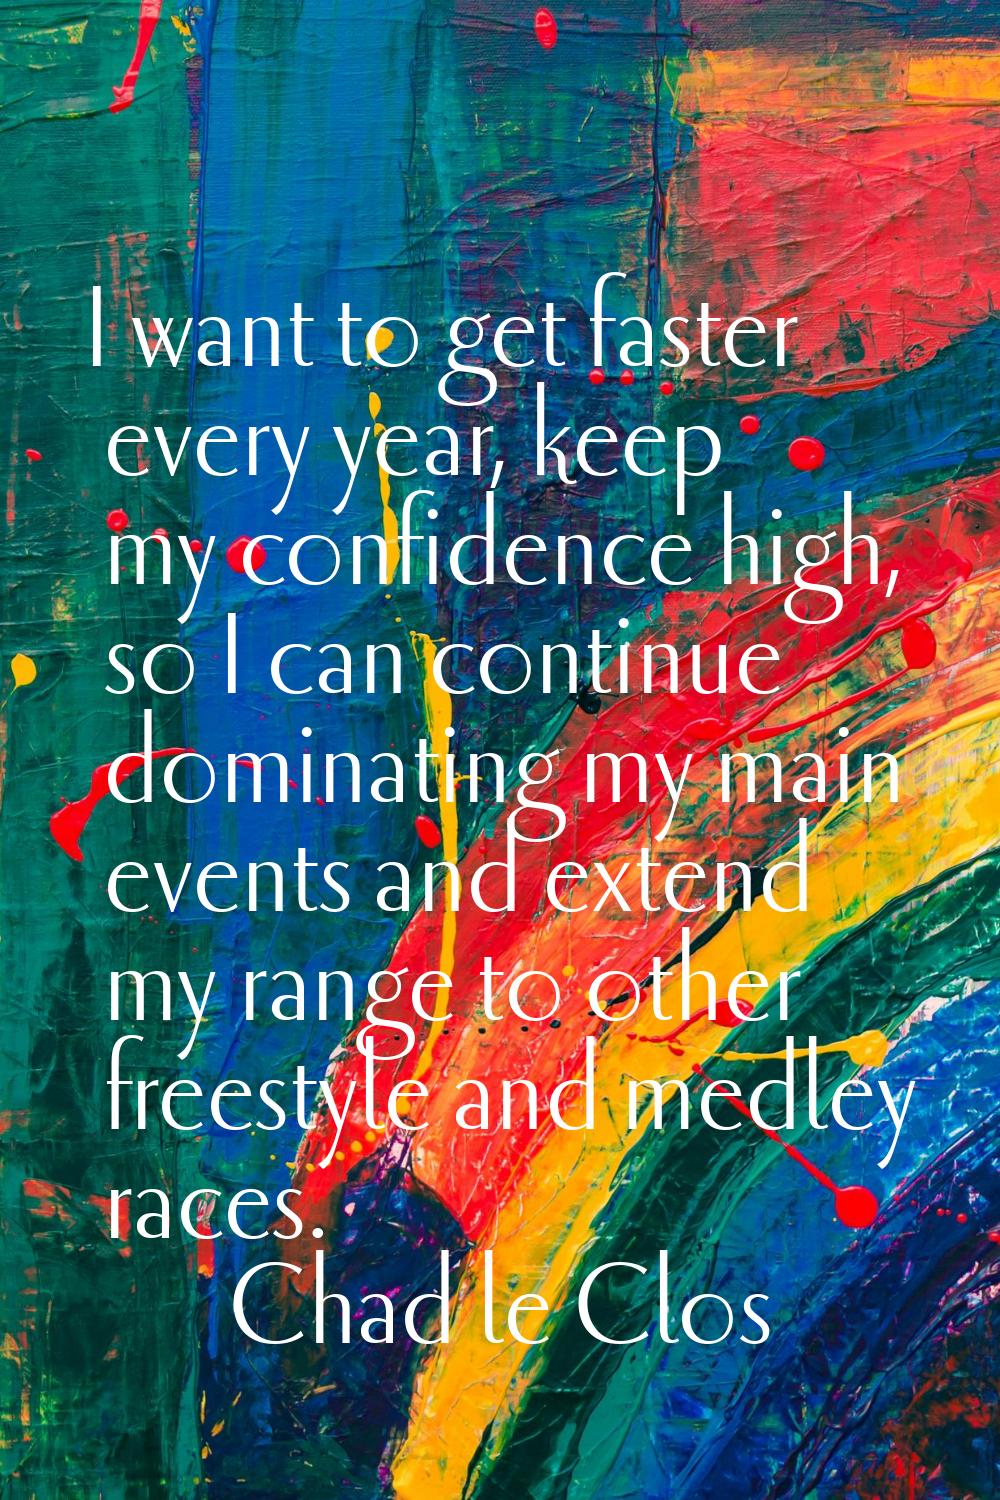 I want to get faster every year, keep my confidence high, so I can continue dominating my main even